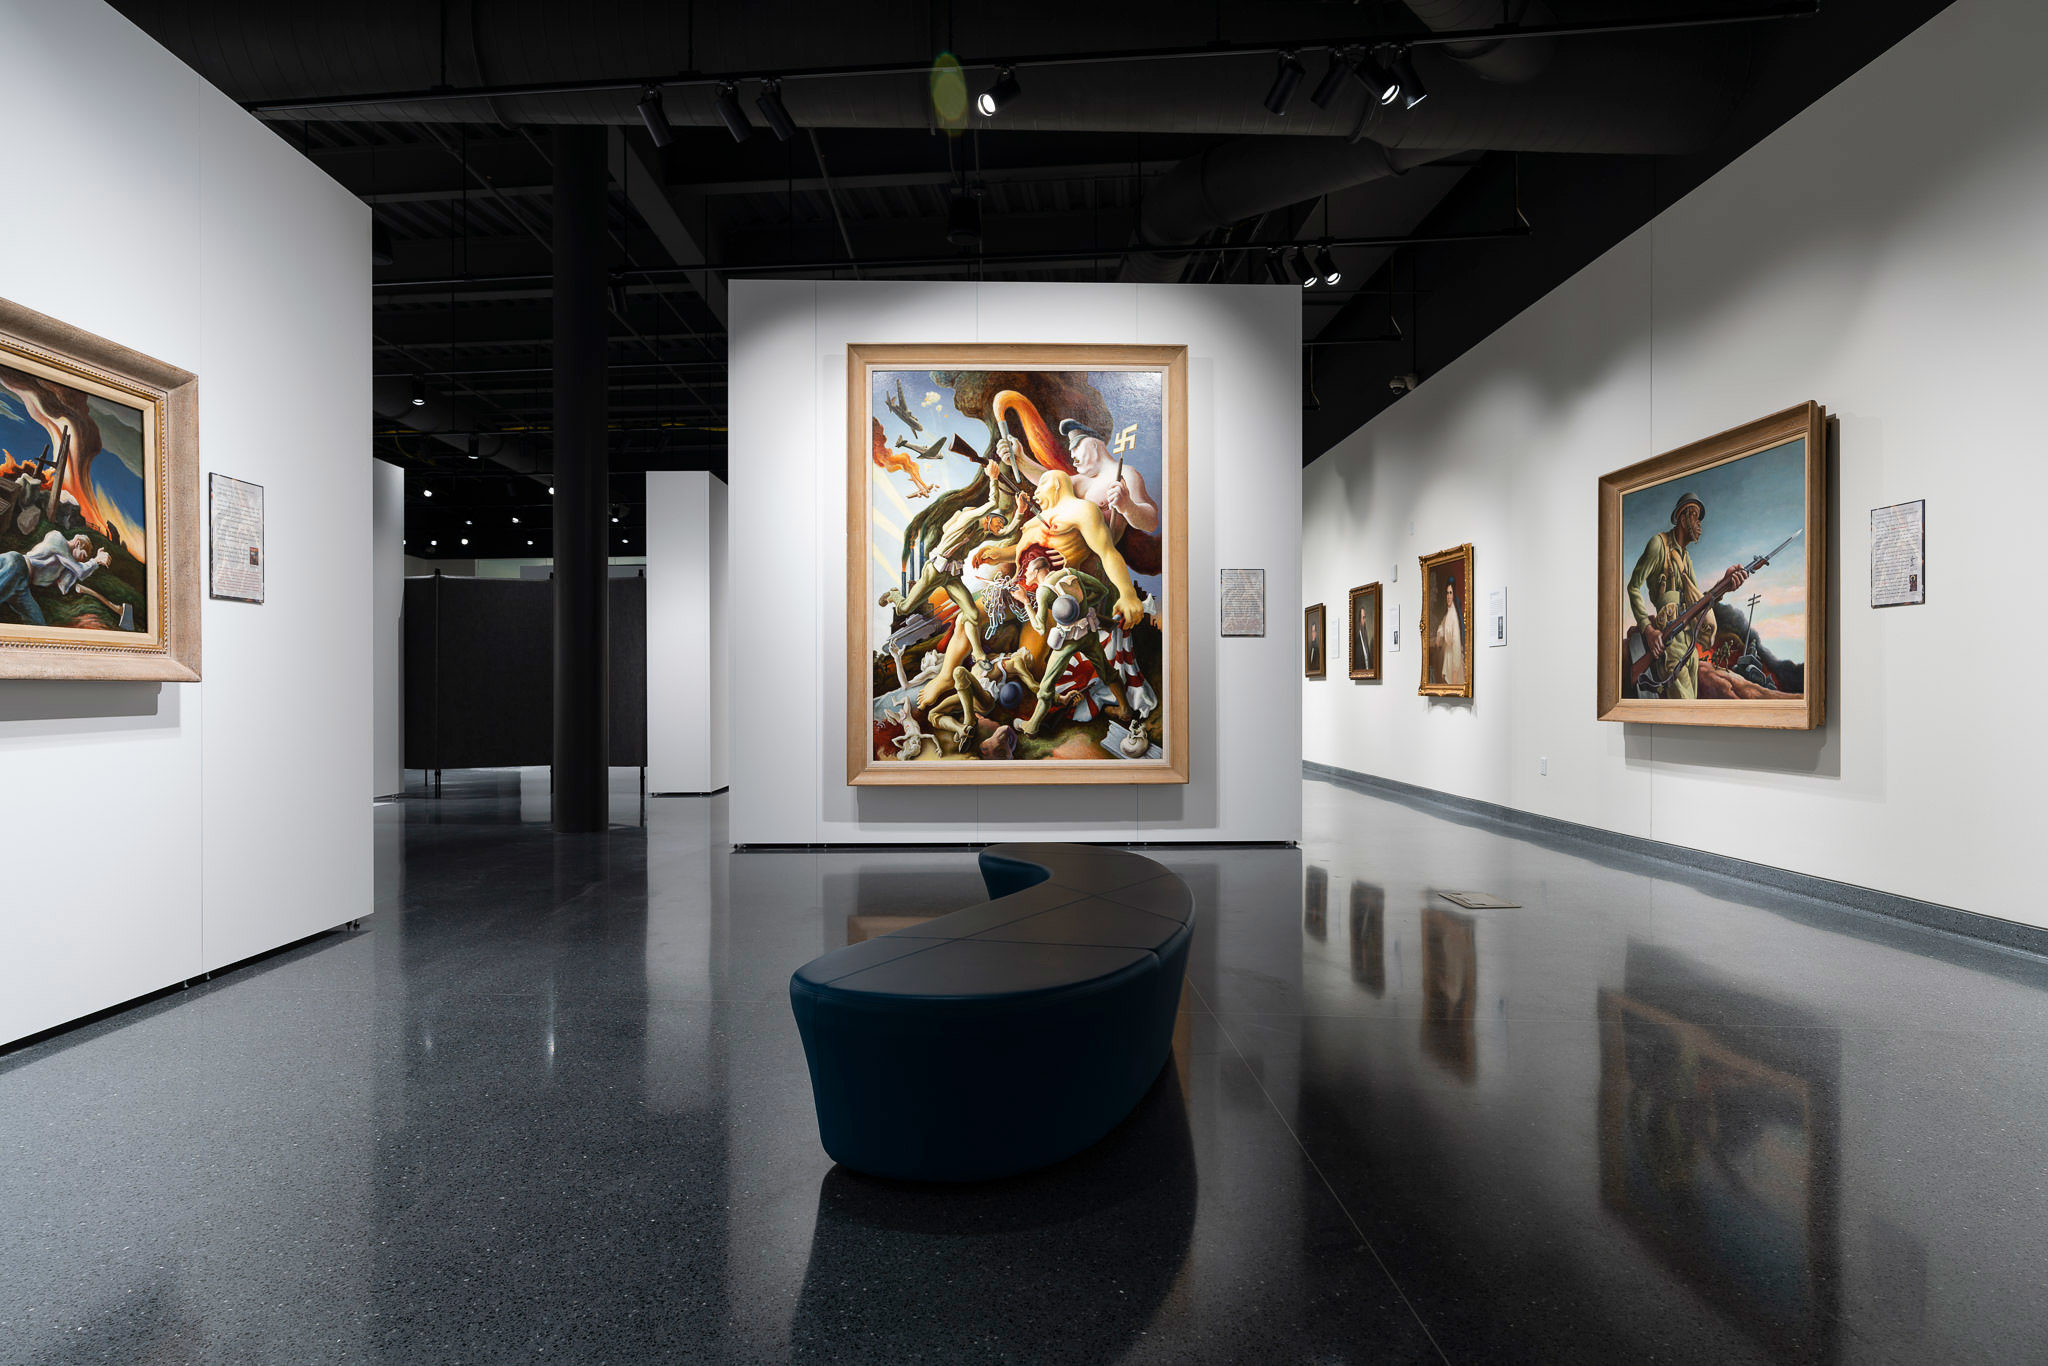 An interior photo of a museum featuring the work of Thomas Hart Benton.